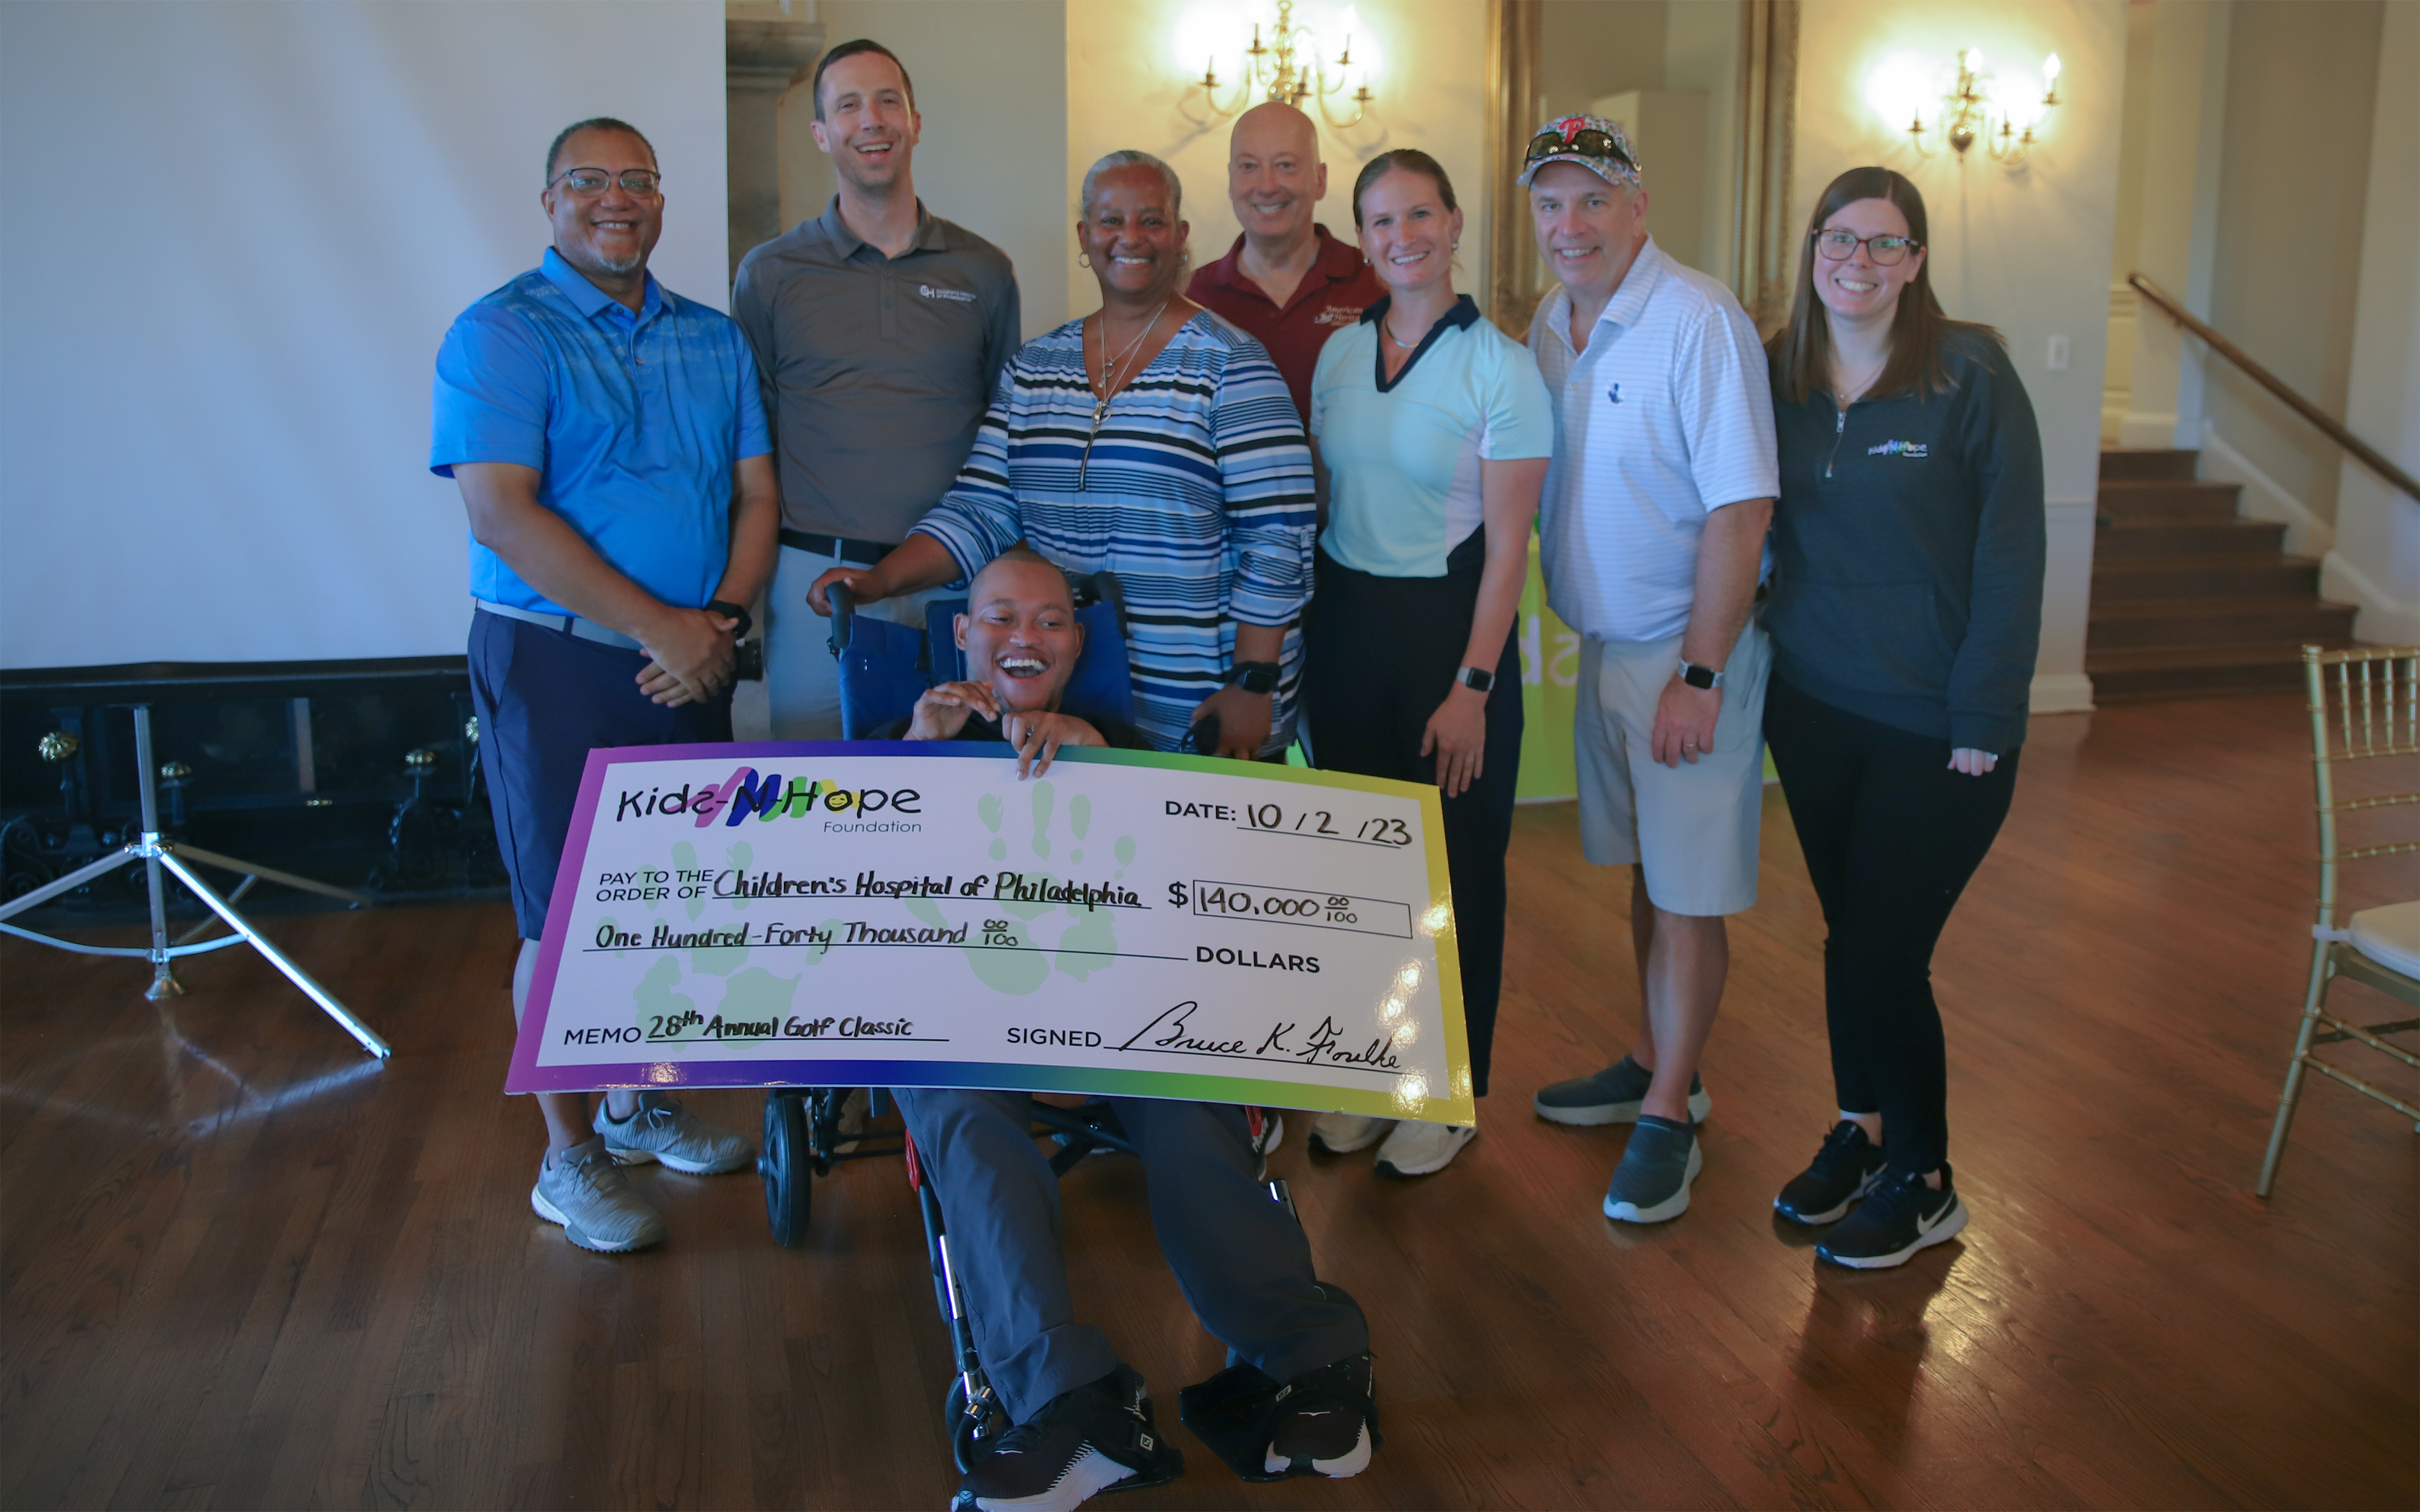 Members of the Kids--Hope Foundation present Children's Hospital of Philadelphia with a check for $140,000 at the 28th annual Kids-N-Hope Golf Classic.